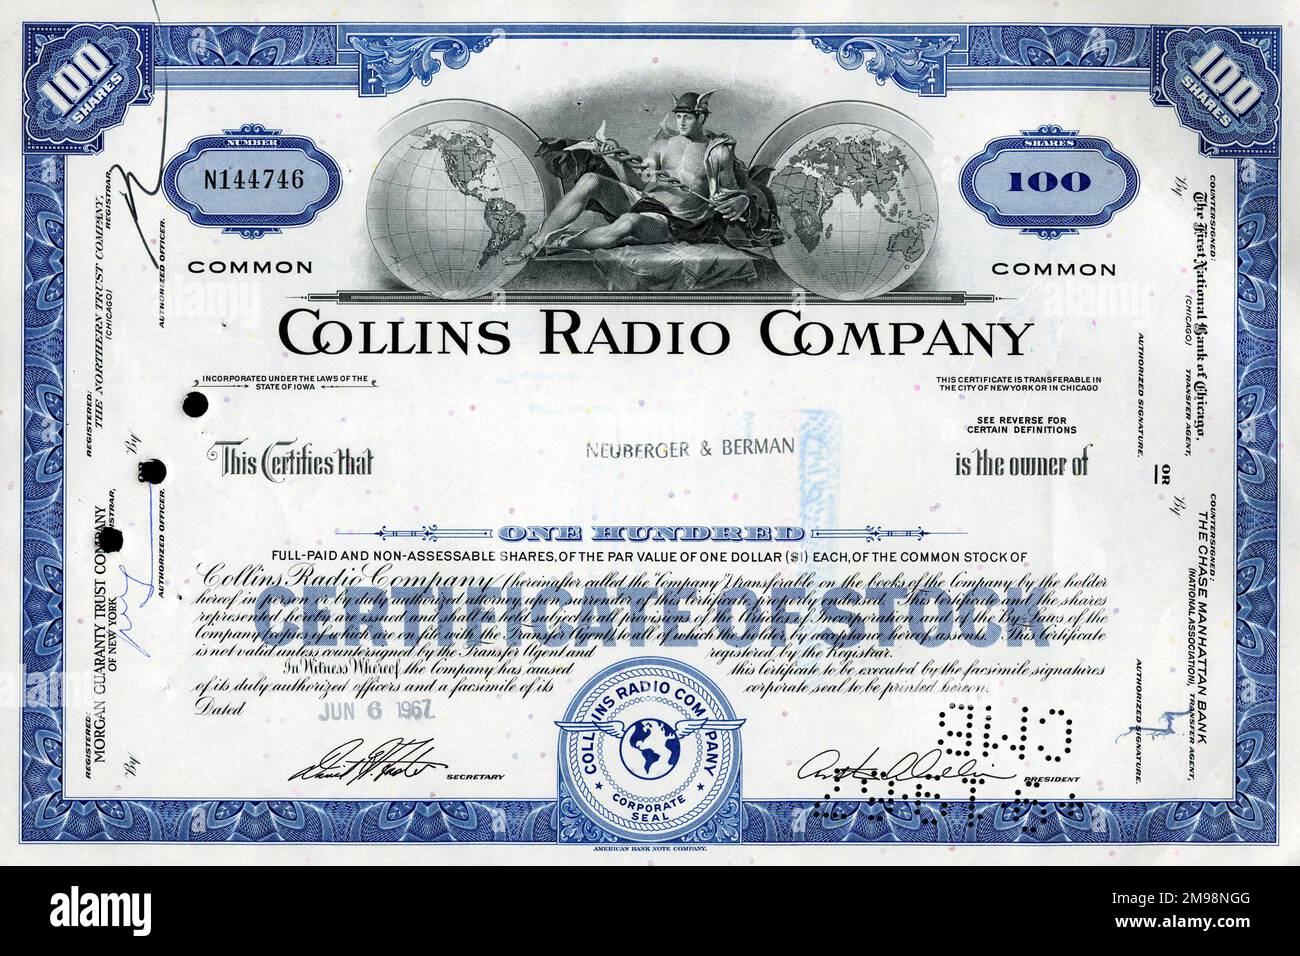 Stock Share Certificate - Collins Radio Company, 100 shares. Stock Photo